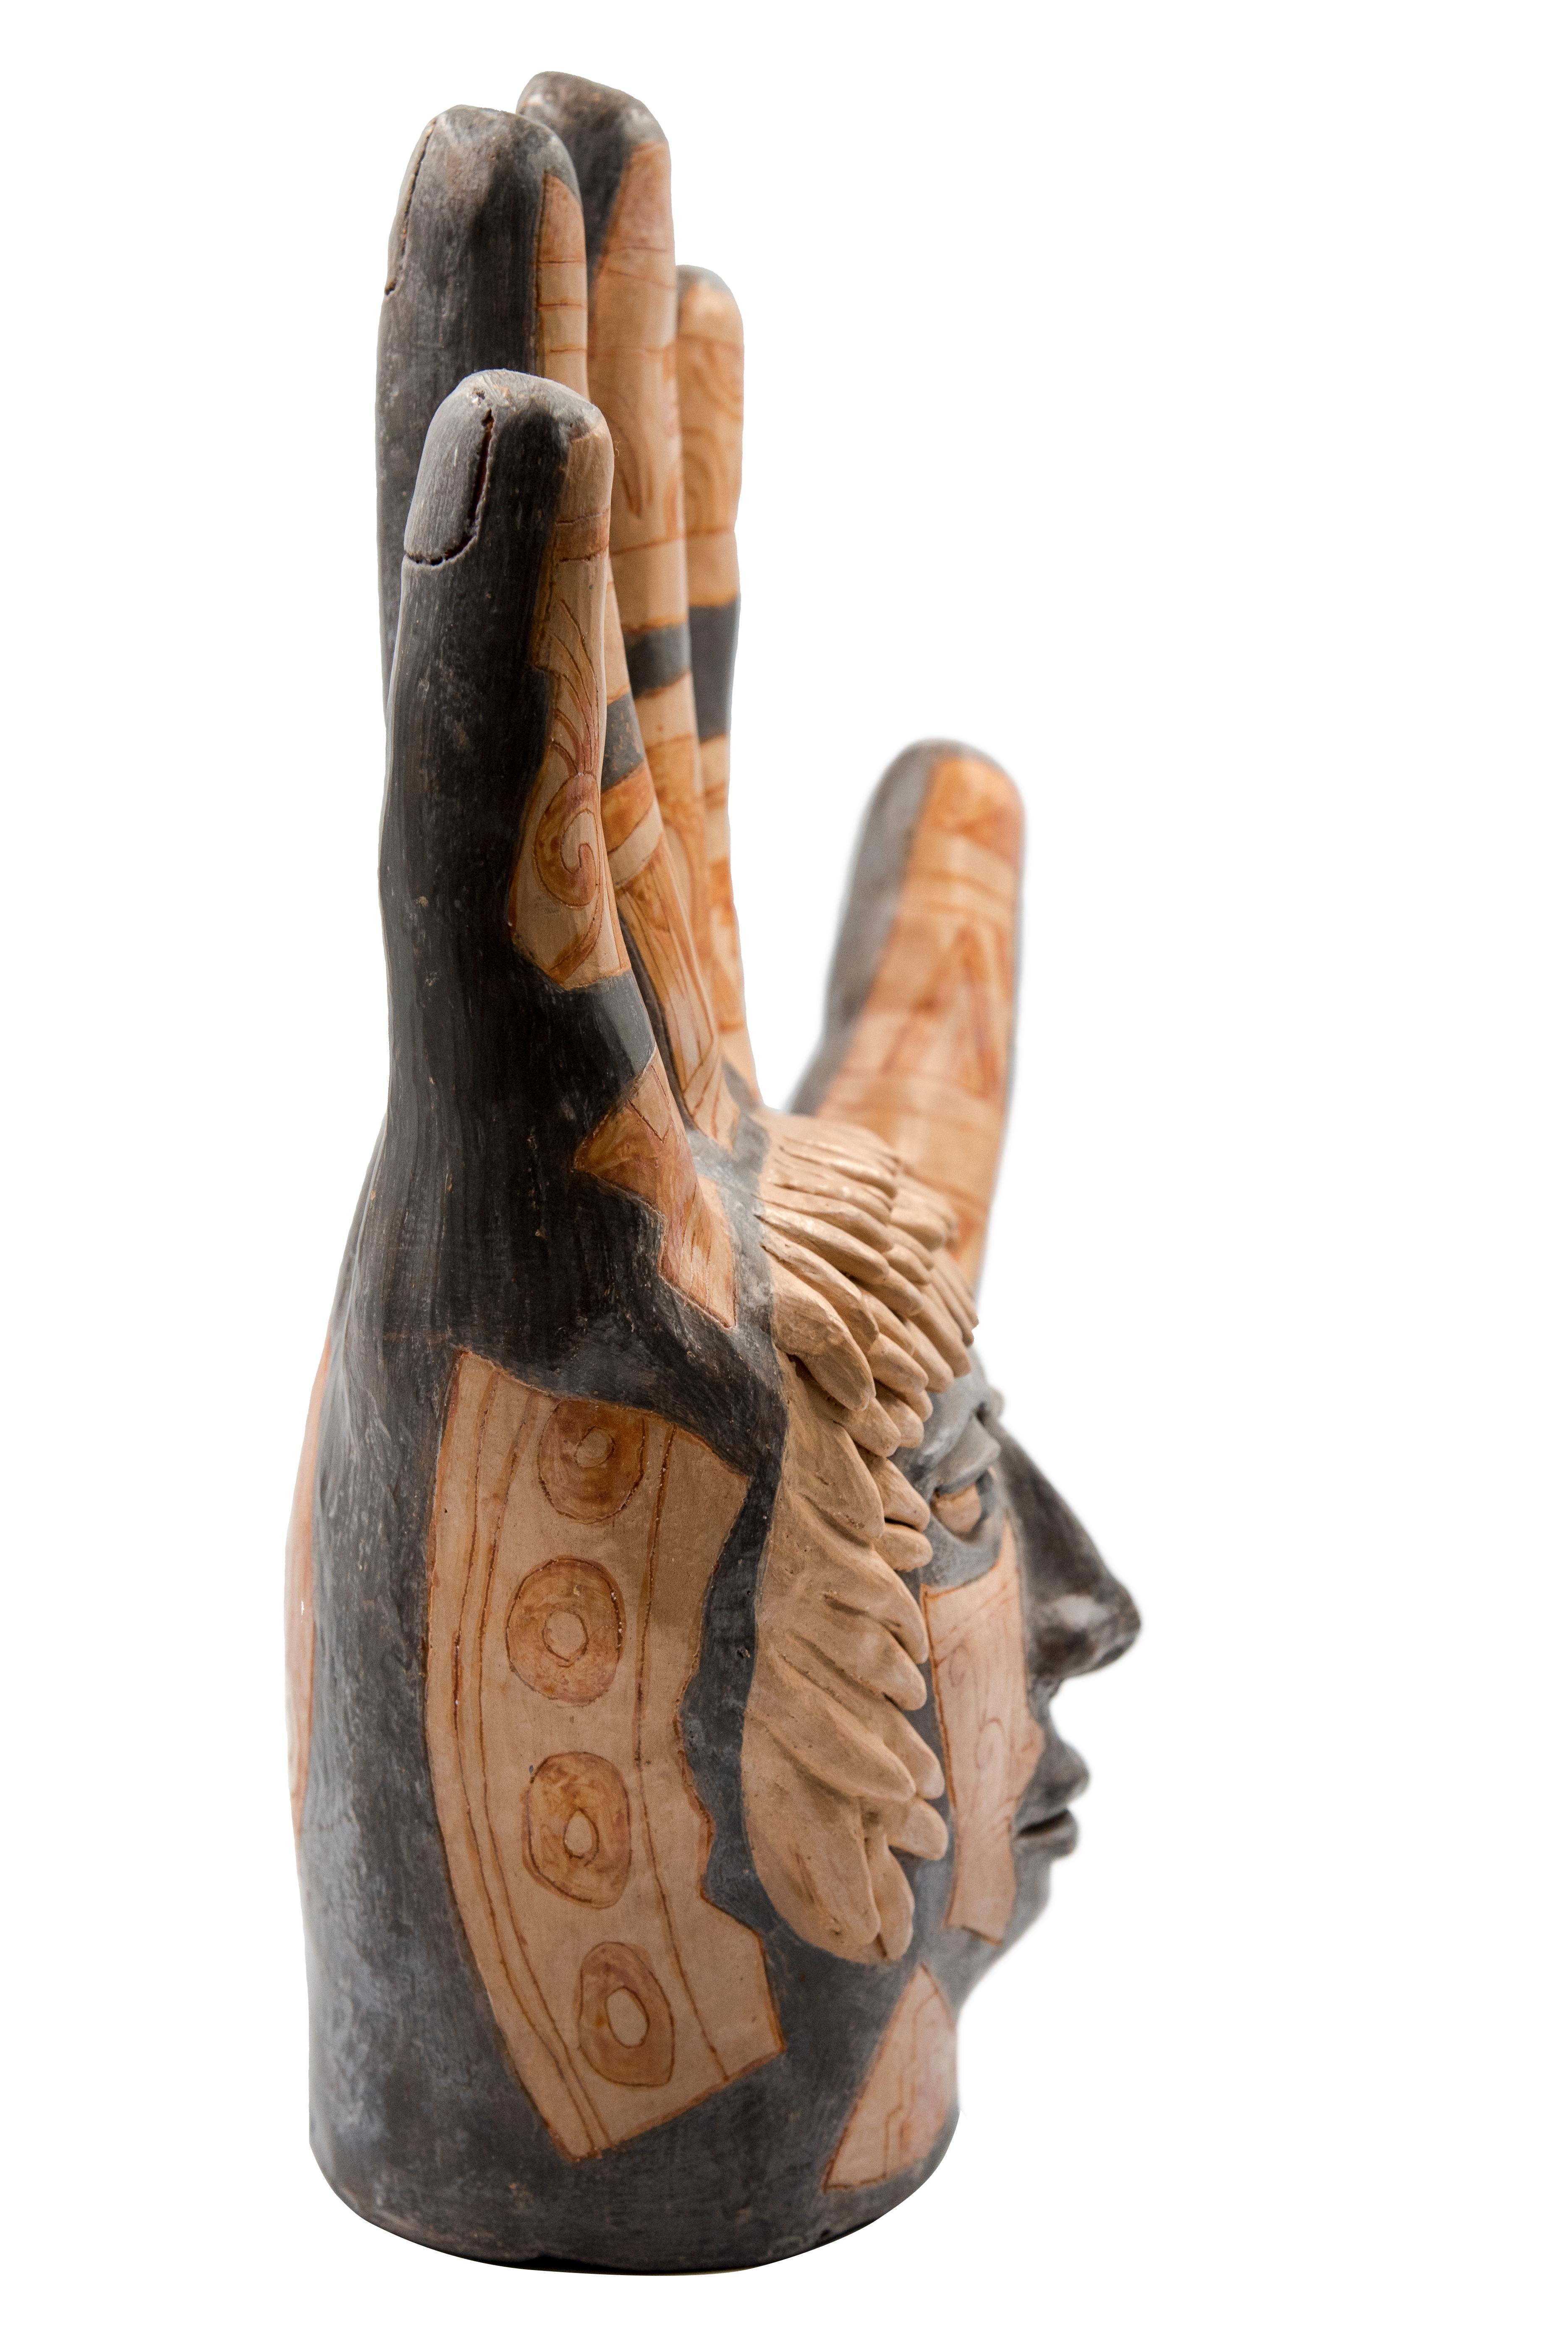 This Mexican ceramic clay hand sculpture is a piece by artist Manuel Reyes. Made with clay from Oaxaca and Zacatecas, painted with oxides from the region. Done with the hand-modeled technique and cooked in traditional wood-fired oven. The hand is